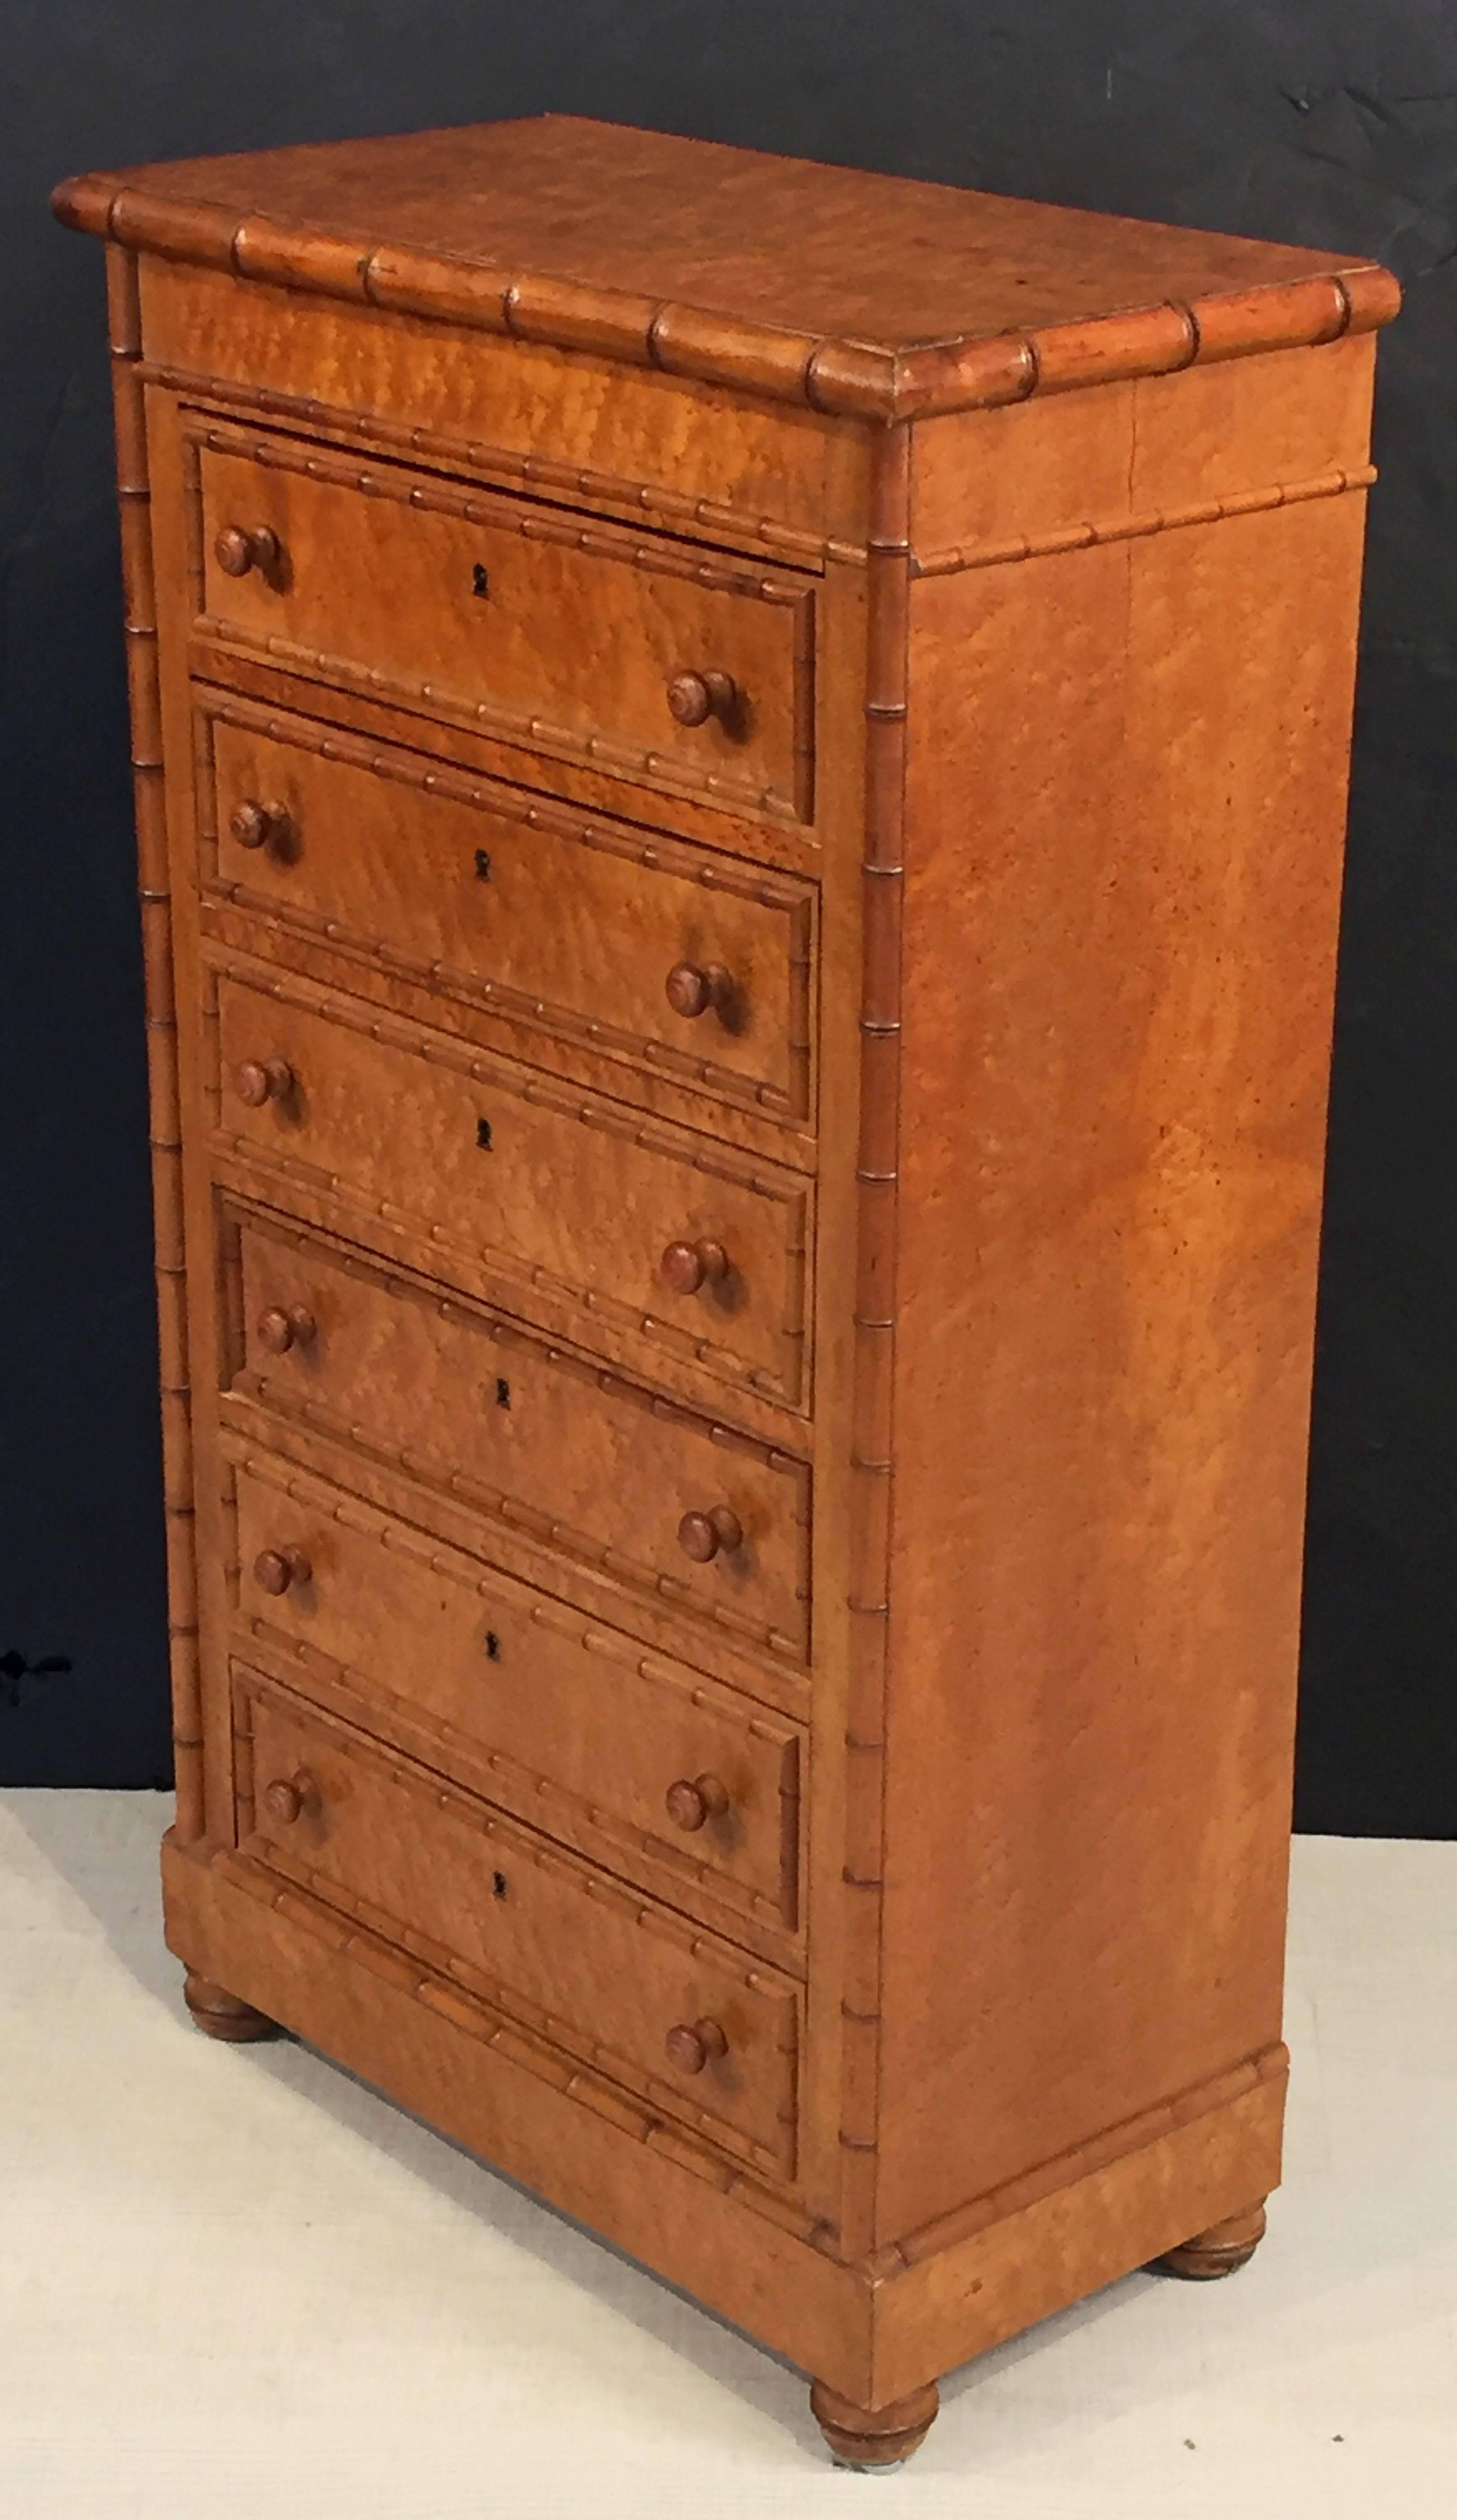 A fine English collector's cabinet or chest of faux bamboo and figured curly or bird's-eye maple, fondly known as a Wellington, featuring a moulded top over six drawers, with decorative faux bamboo accents, turned knobs, and escutcheons, on four